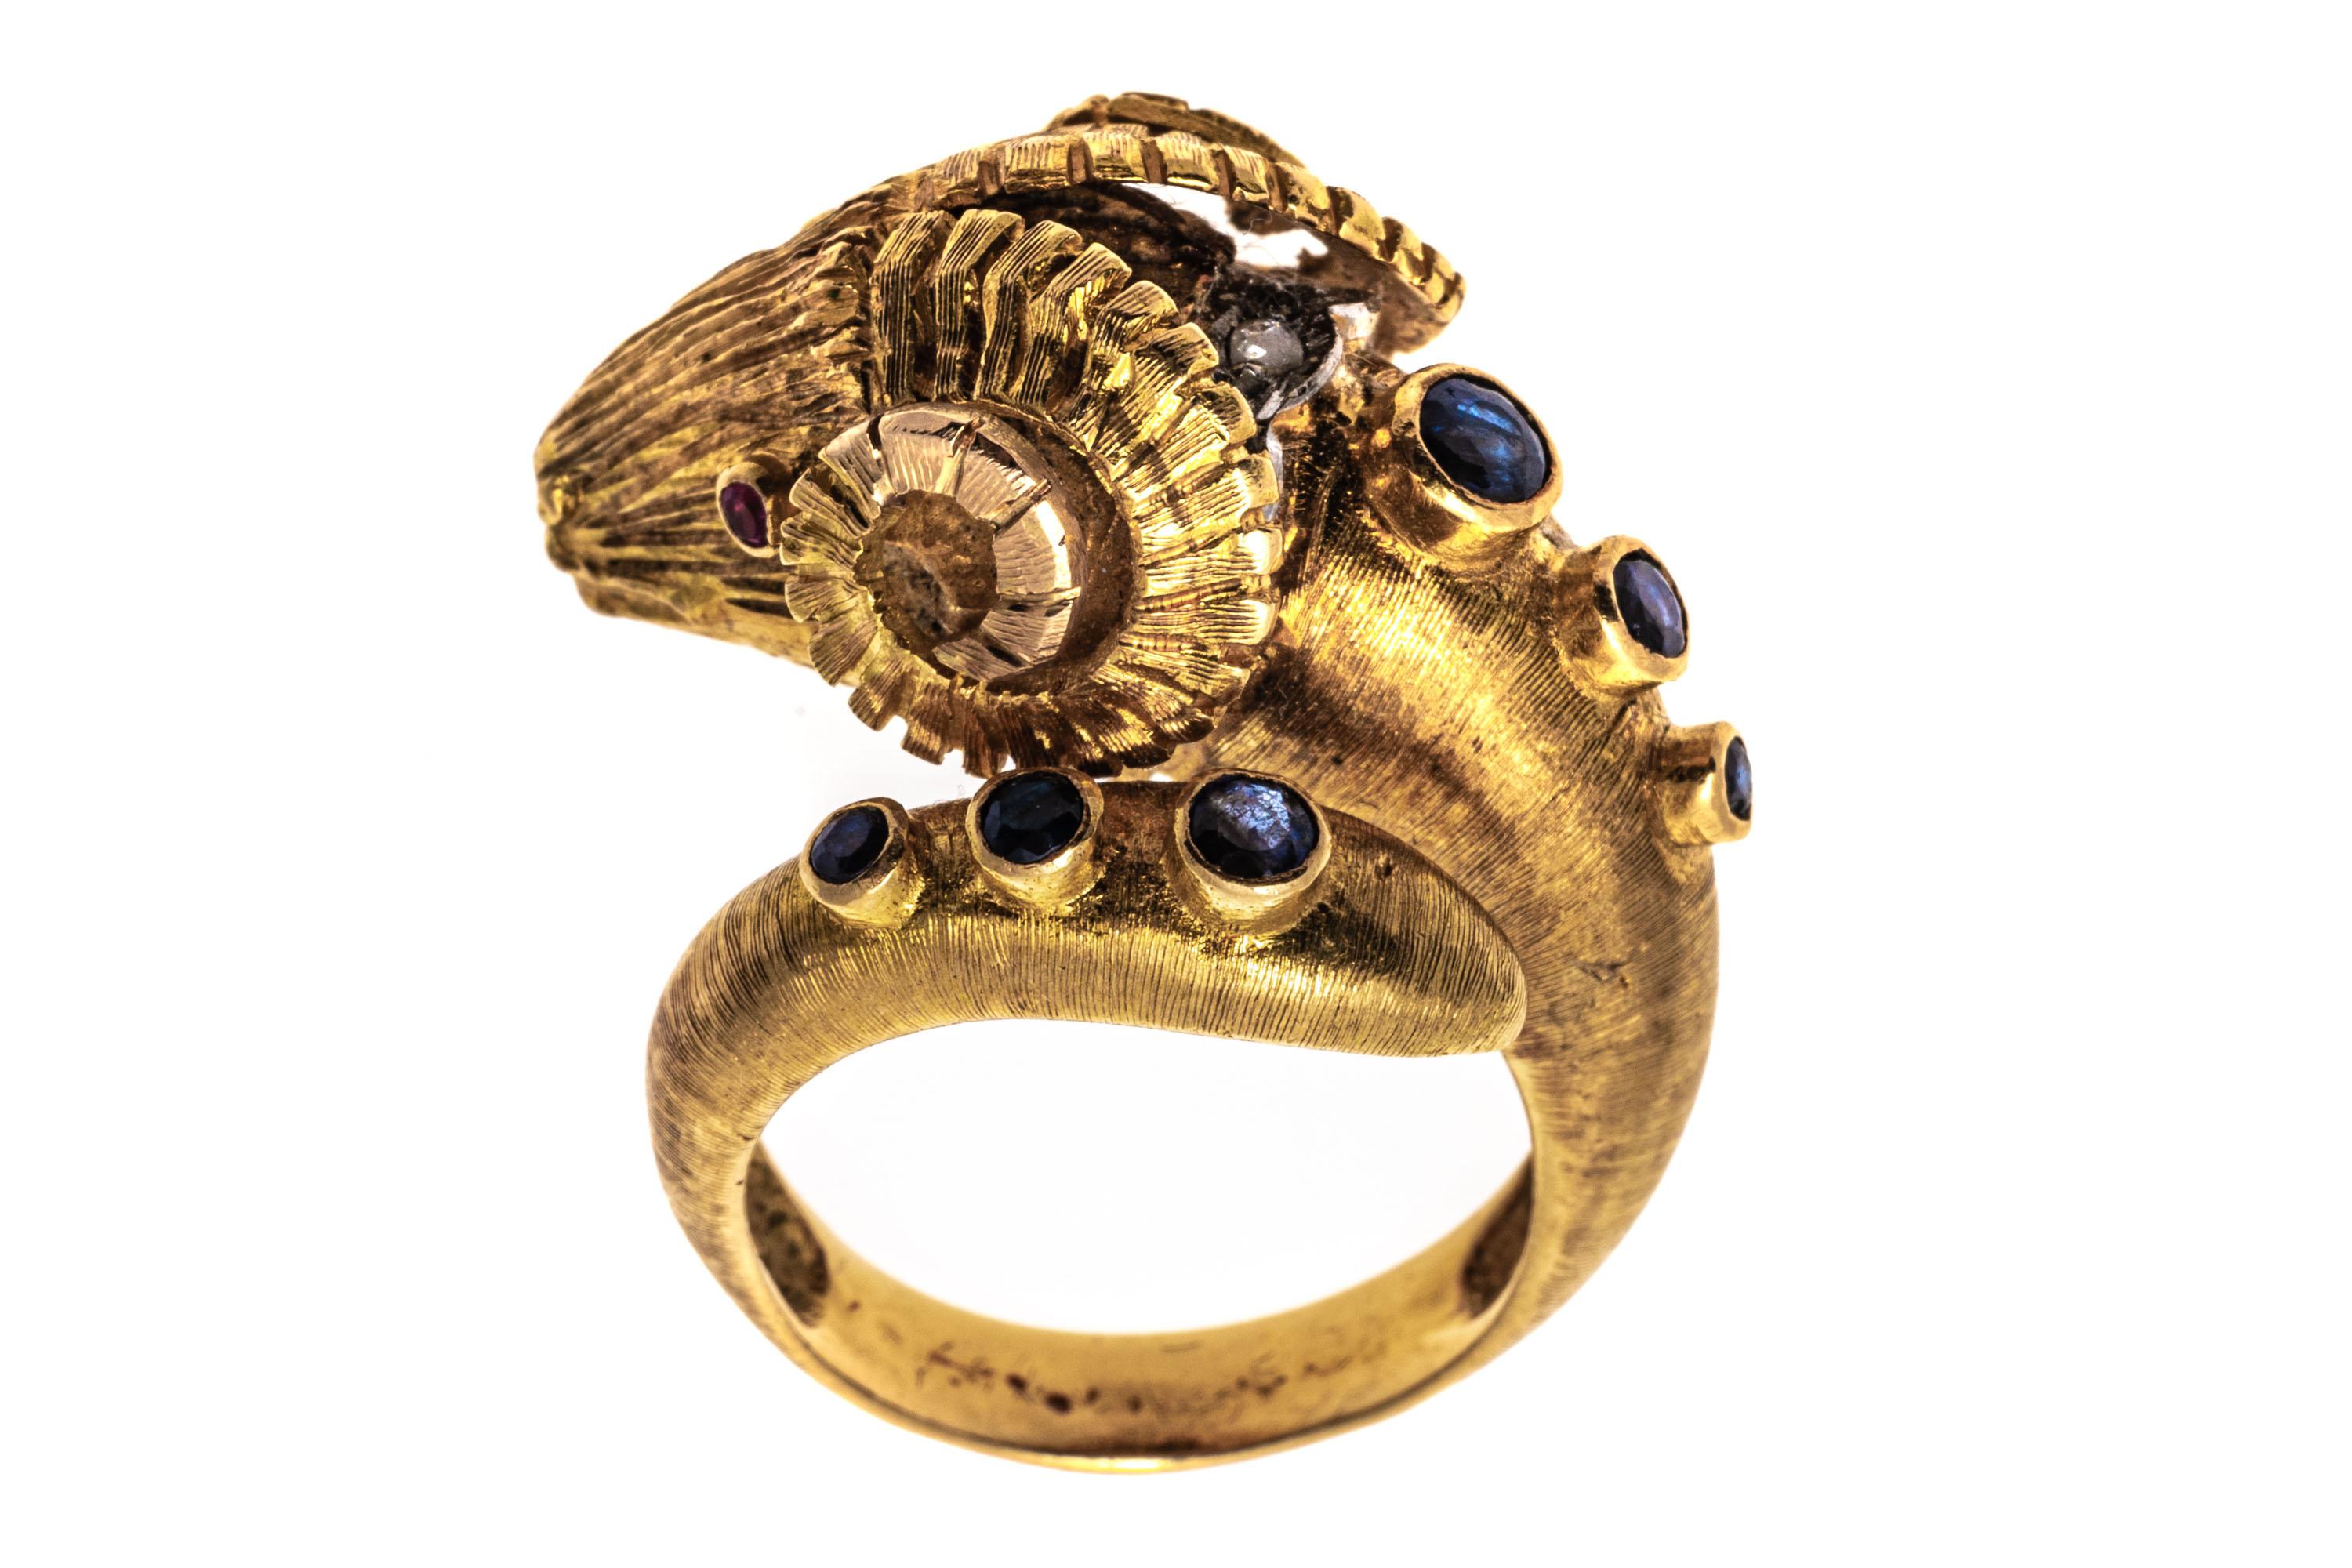 14k Yellow Gold Rams Head Ring With Sapphires, Rubies And Diamonds, Size 7-8 For Sale 11